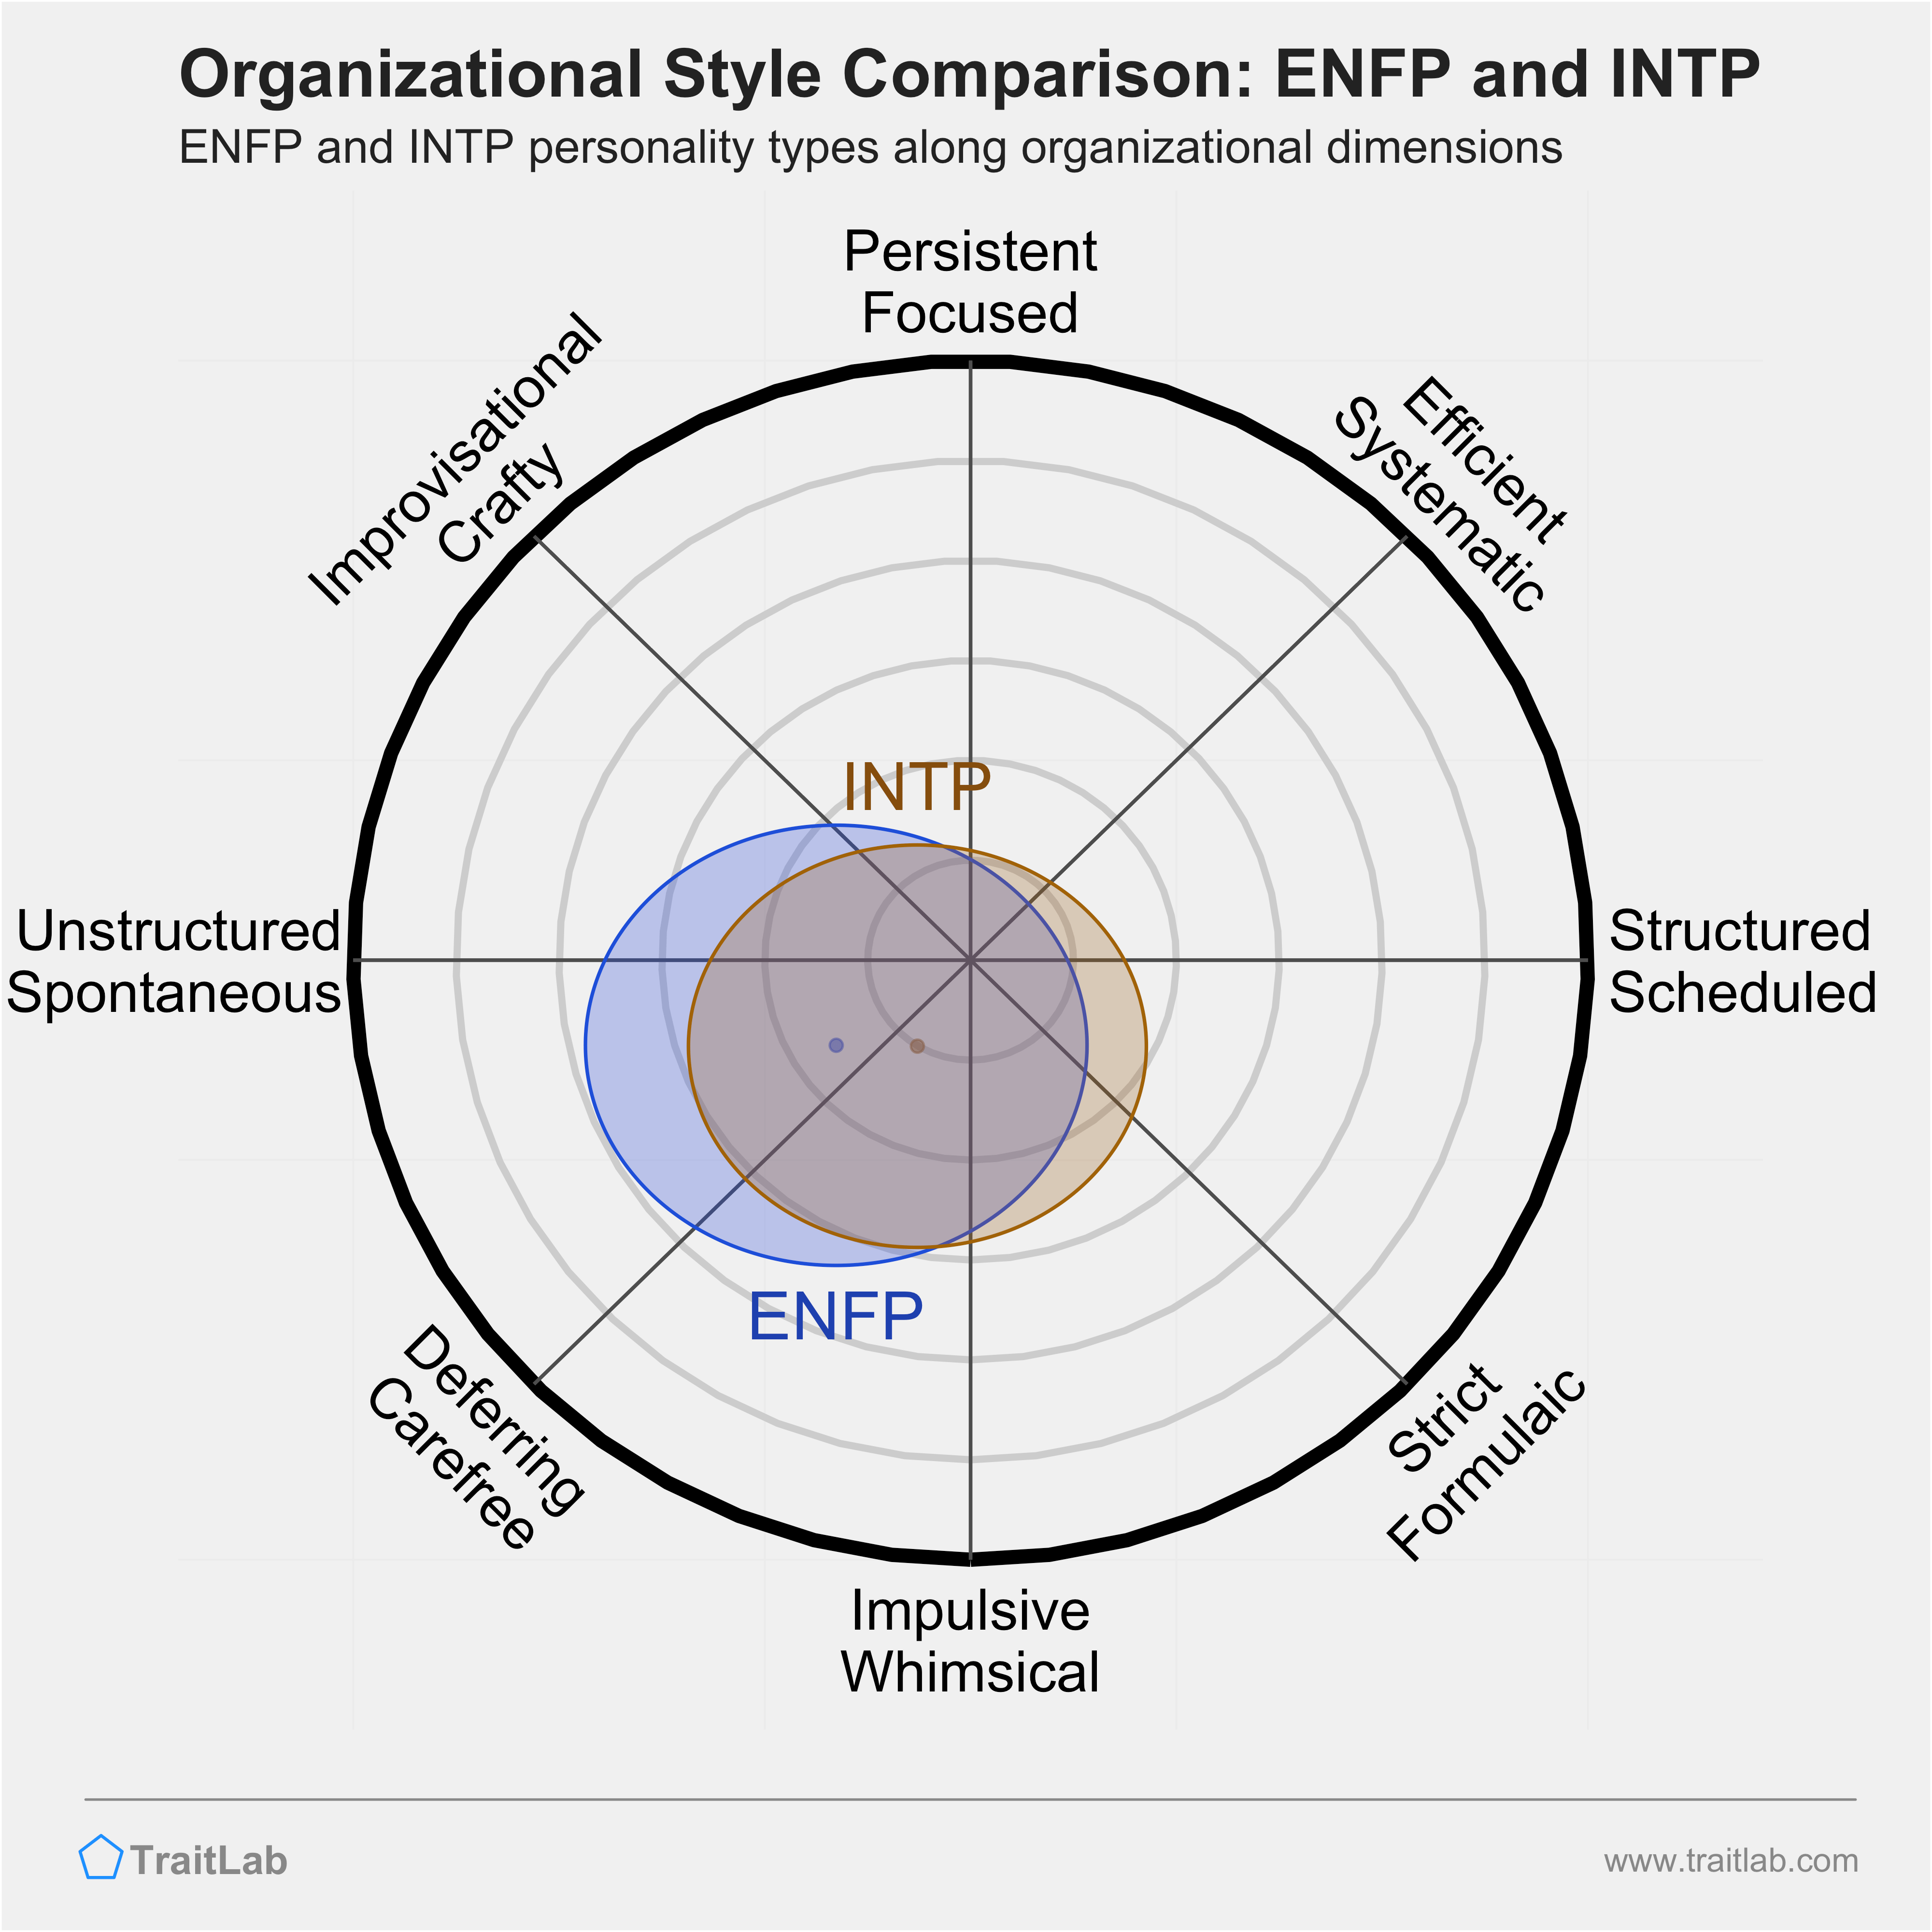 ENFP and INTP comparison across organizational dimensions